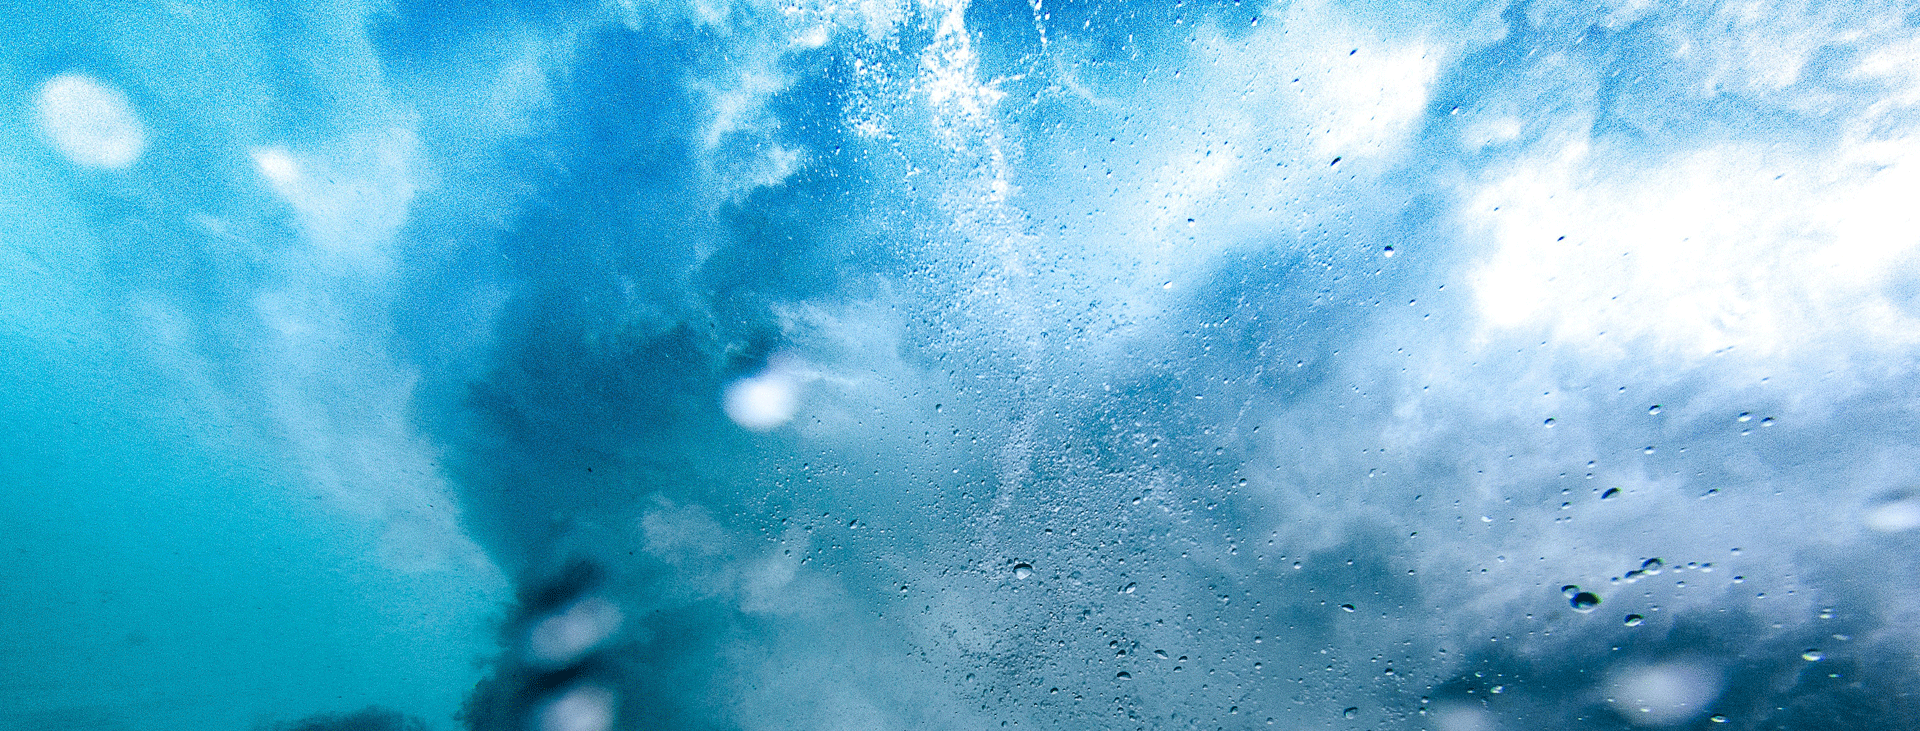 Abstract painting of blue and white, water and air